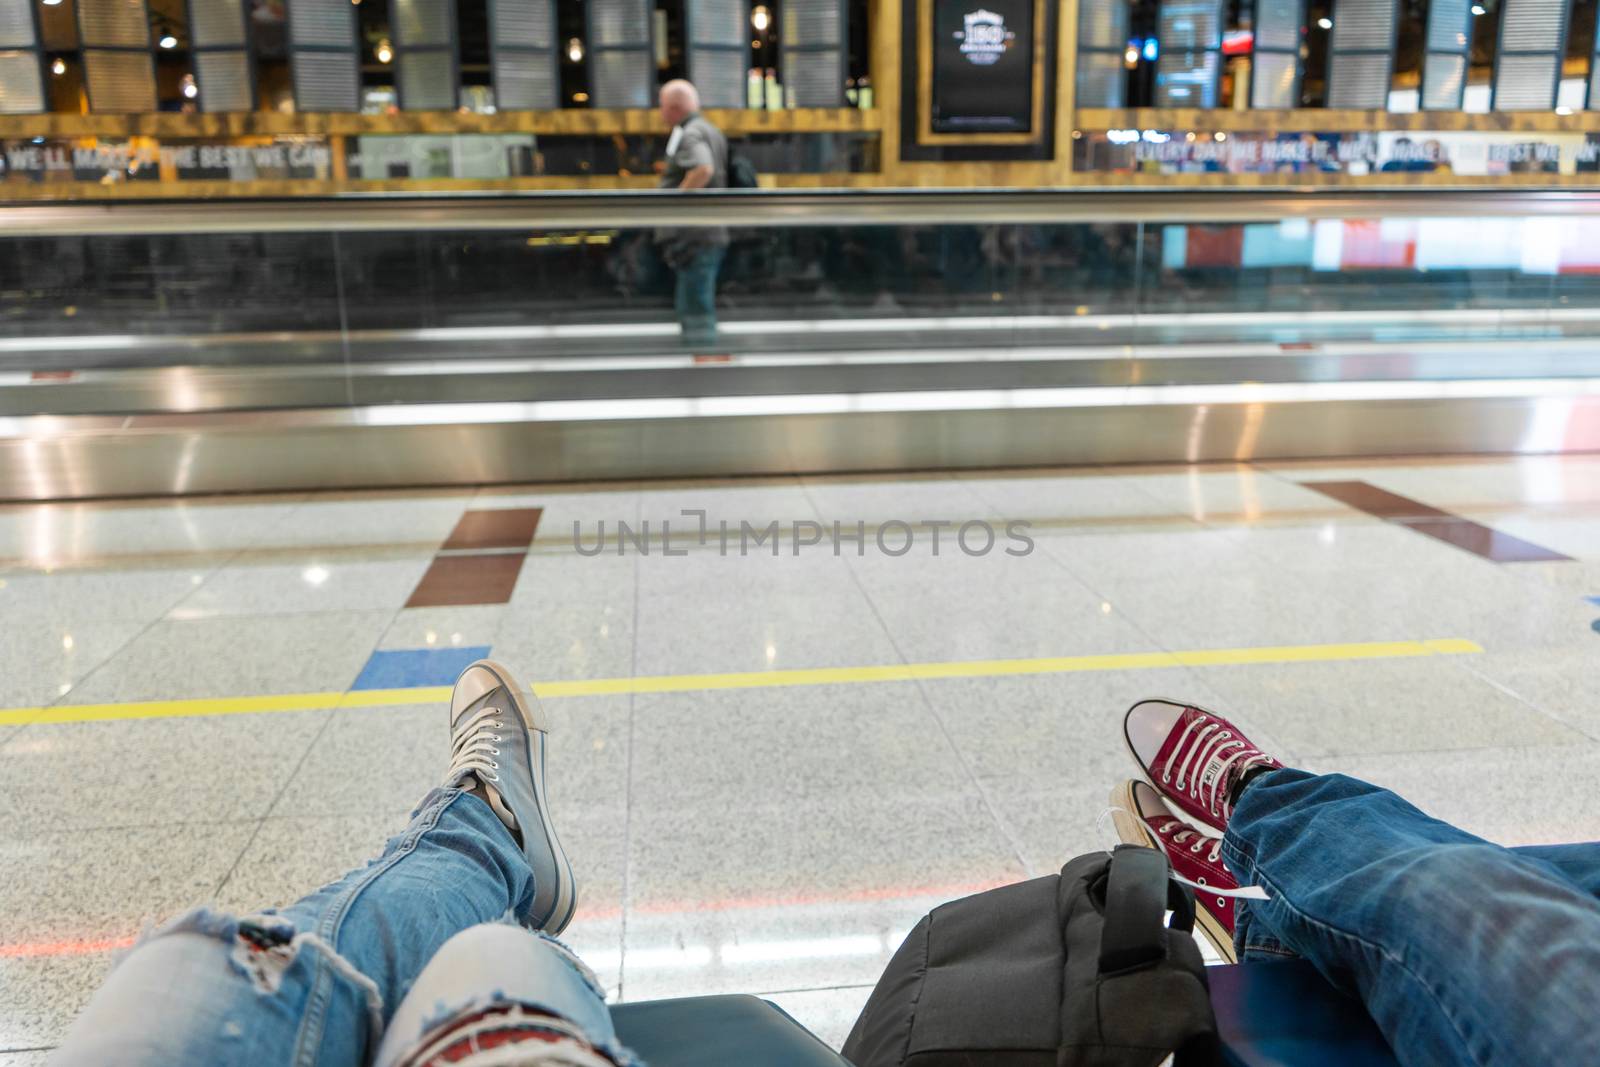 Passengers are waiting for their flight in the airport waiting area. First-person view, girl in ripped jeans by Try_my_best